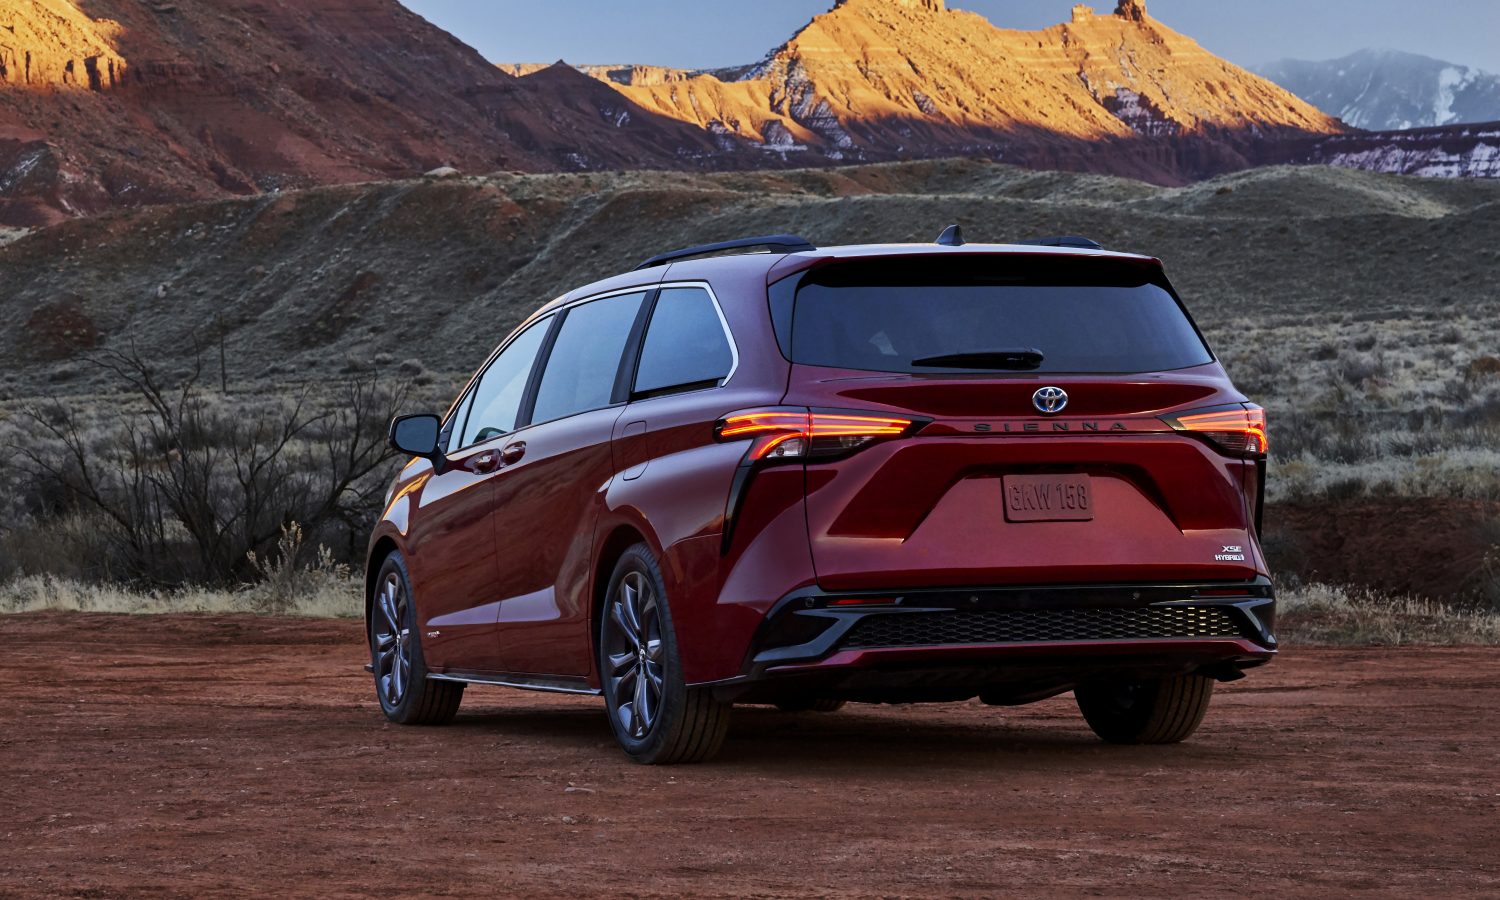 a deep red all-new Toyota Sienna, rear view in a desert landscape